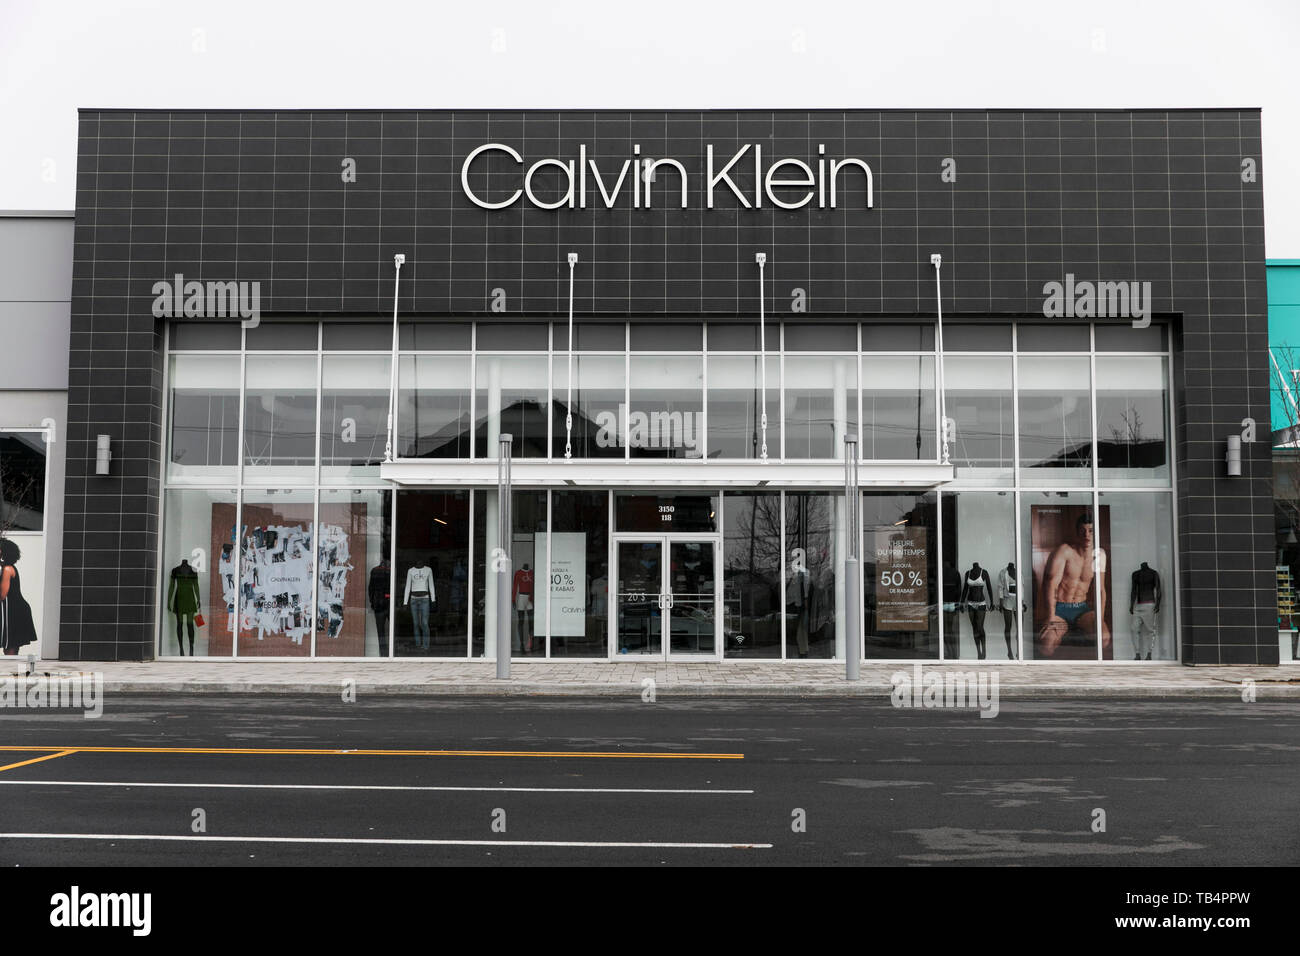 A logo sign outside of a Calvin Klein retail store location in  Vaudreuil-Dorion, Quebec, Canada, on April 21, 2019 Stock Photo - Alamy